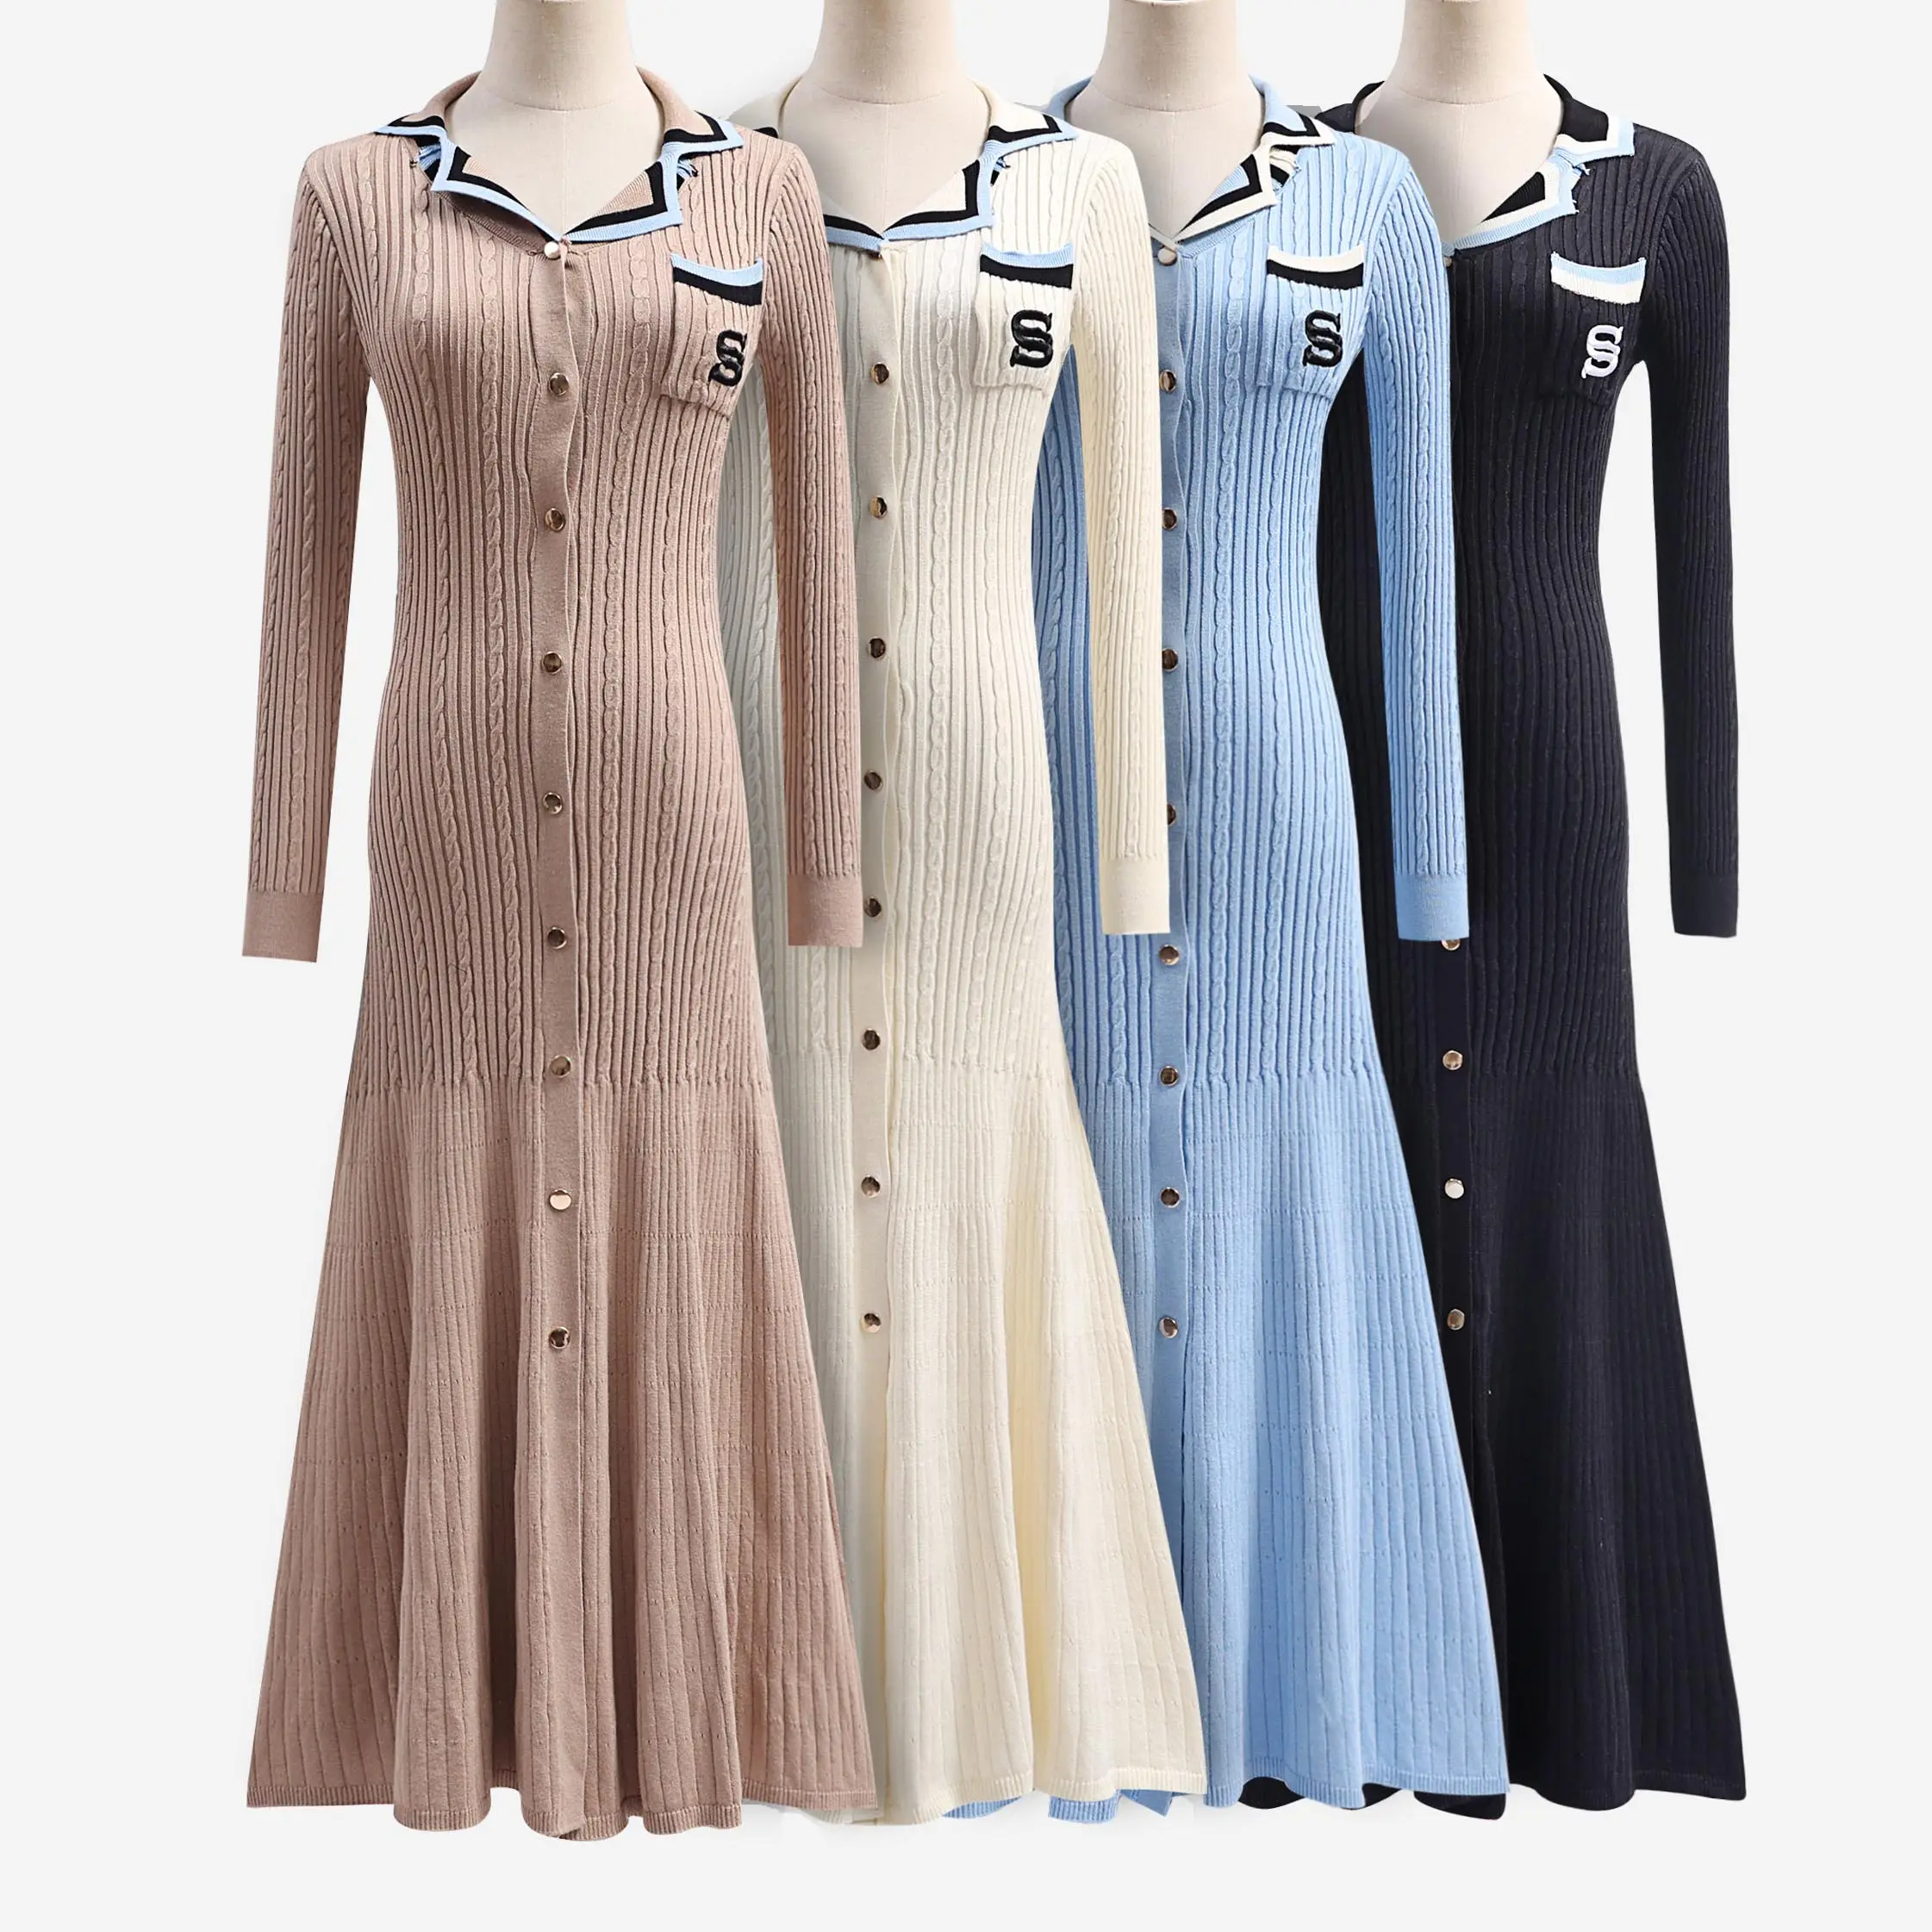 Party party small fragrance quality slim dress polo collar advanced sense long skirt matching color waist slimming knit skirt